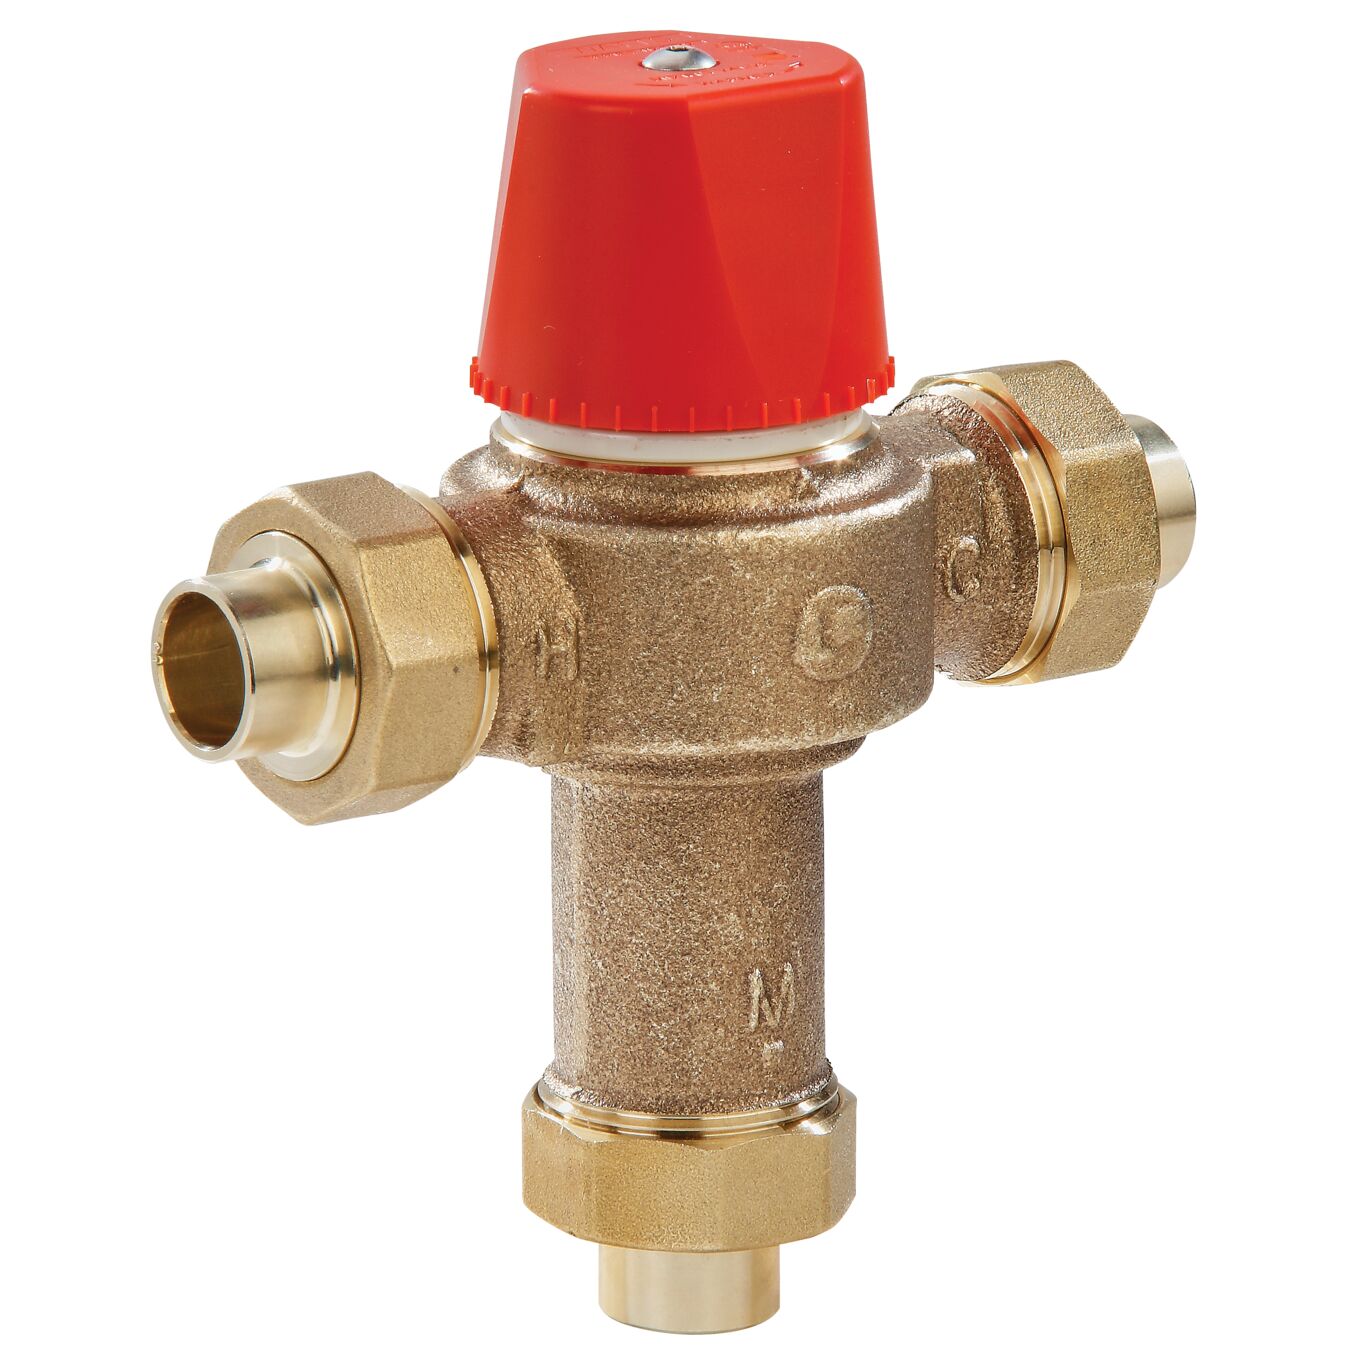 Adjustable Thermostatic Mixing Valve Asymmetrical from 3/4”m by 20-45 ° C 